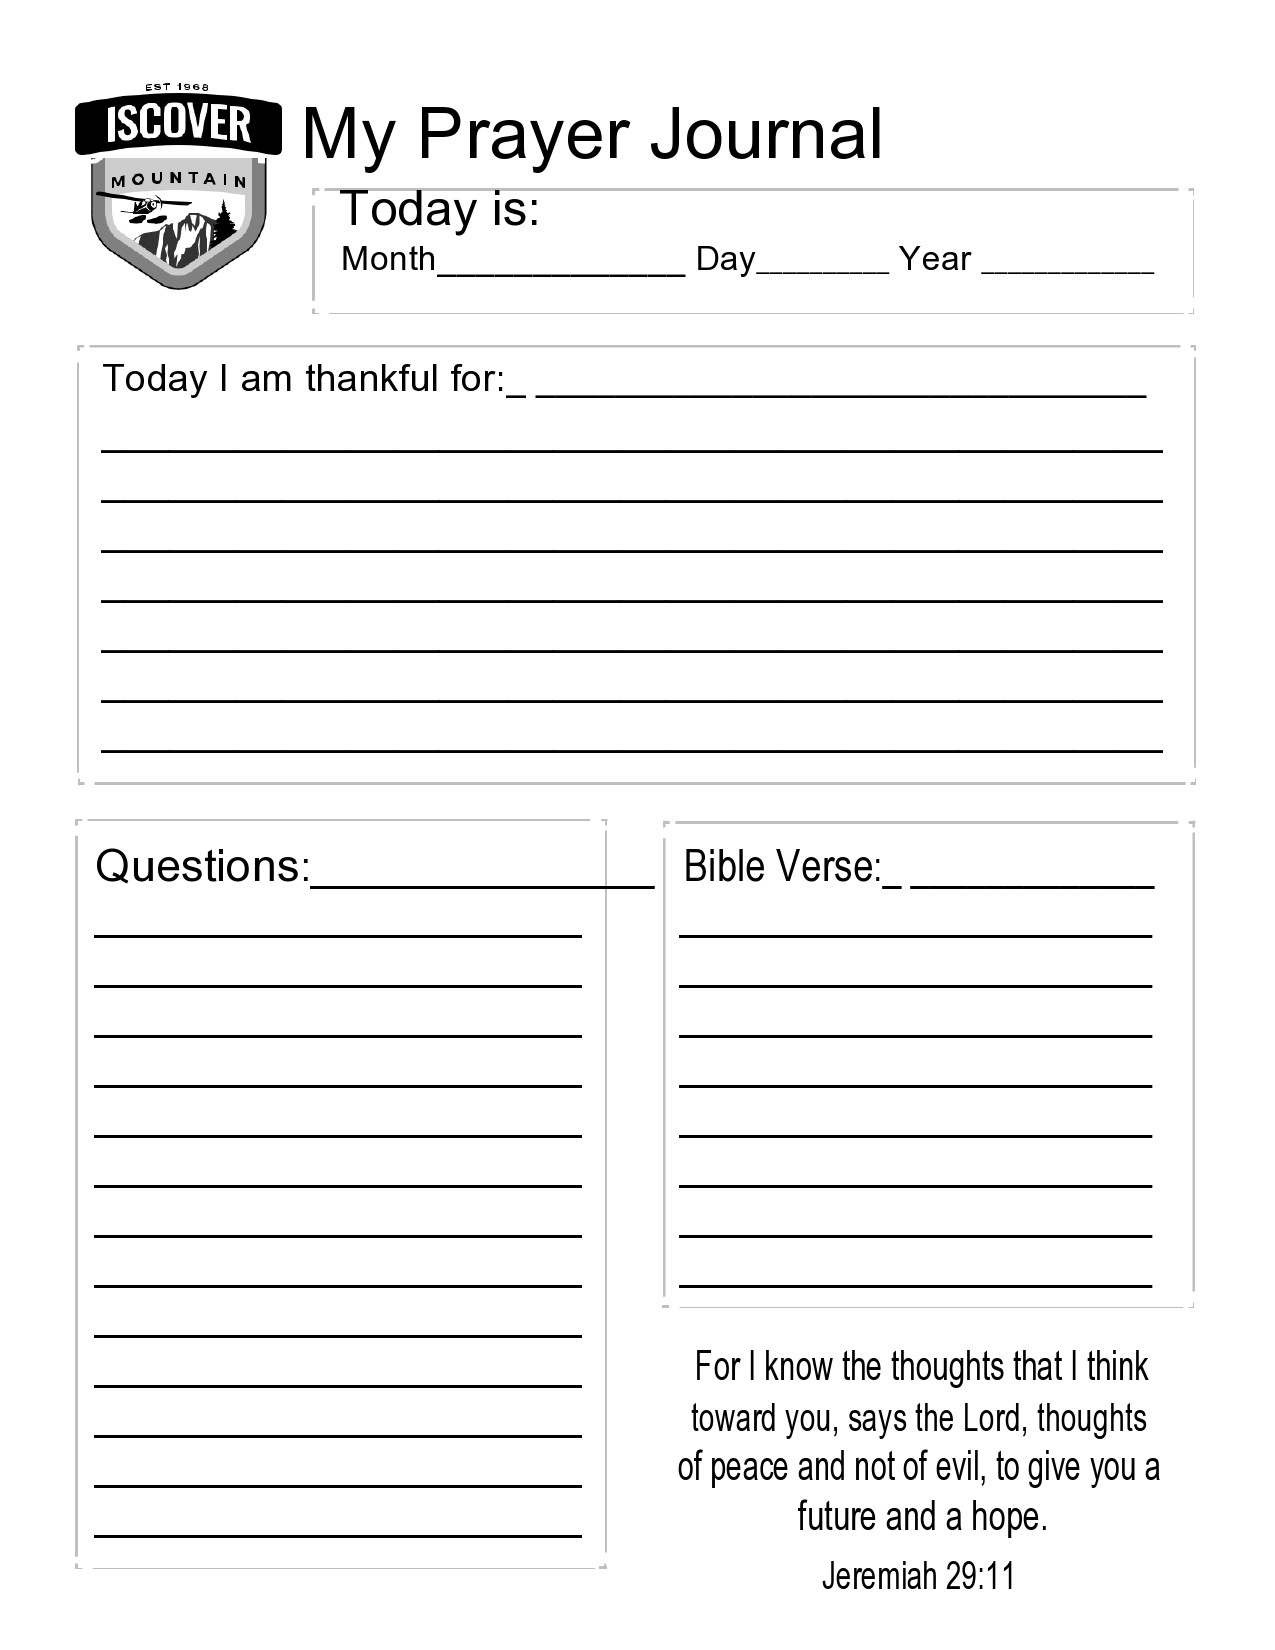 Daily Devotional Template